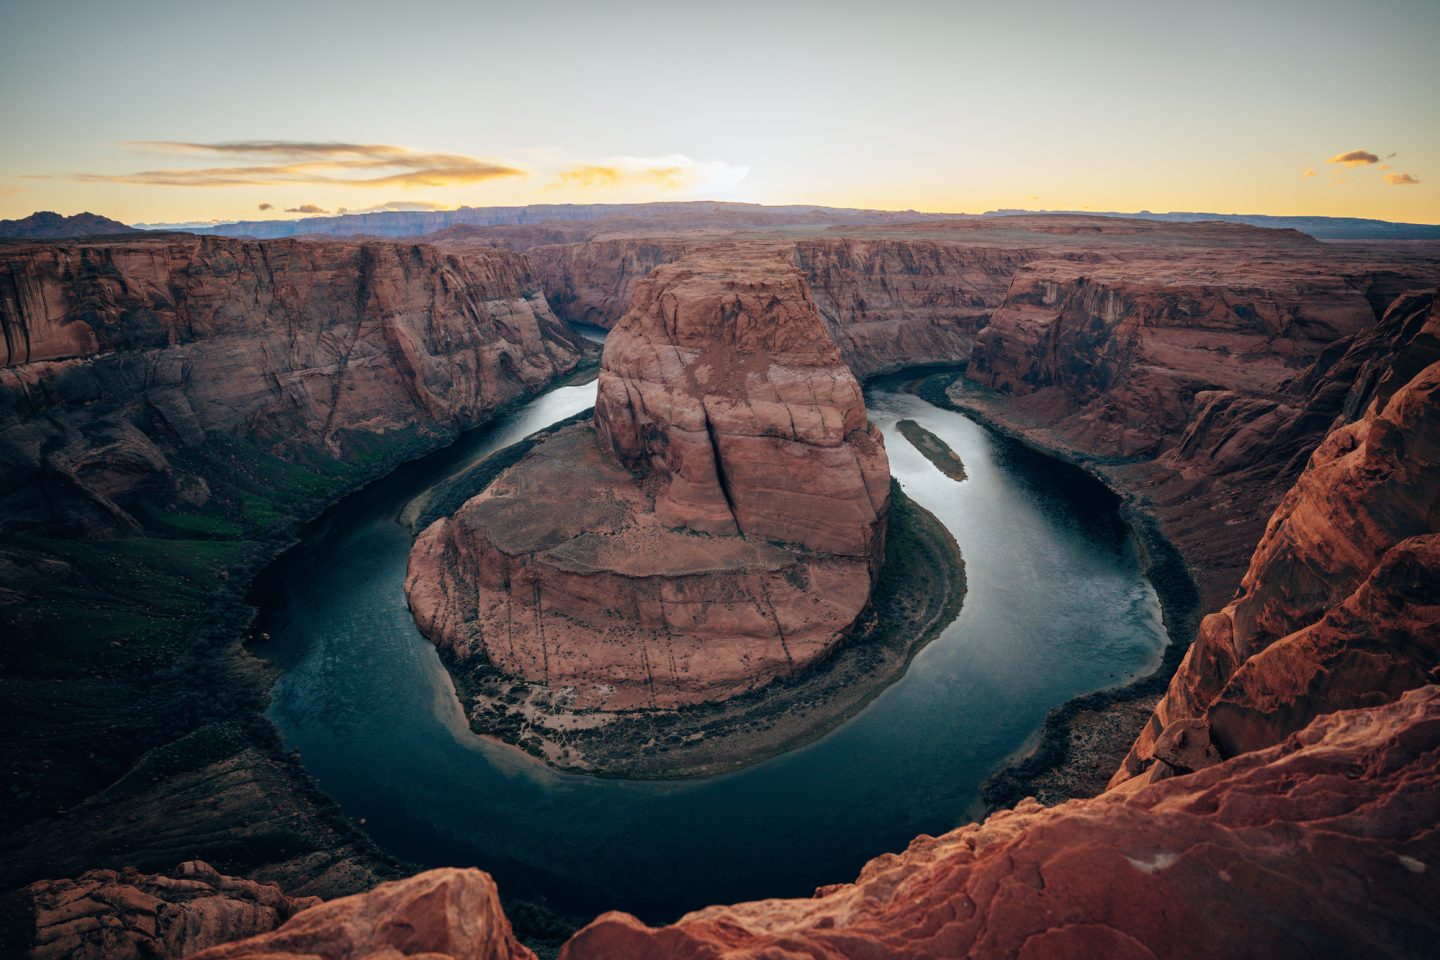 Best time of day to see Horseshoe Bend